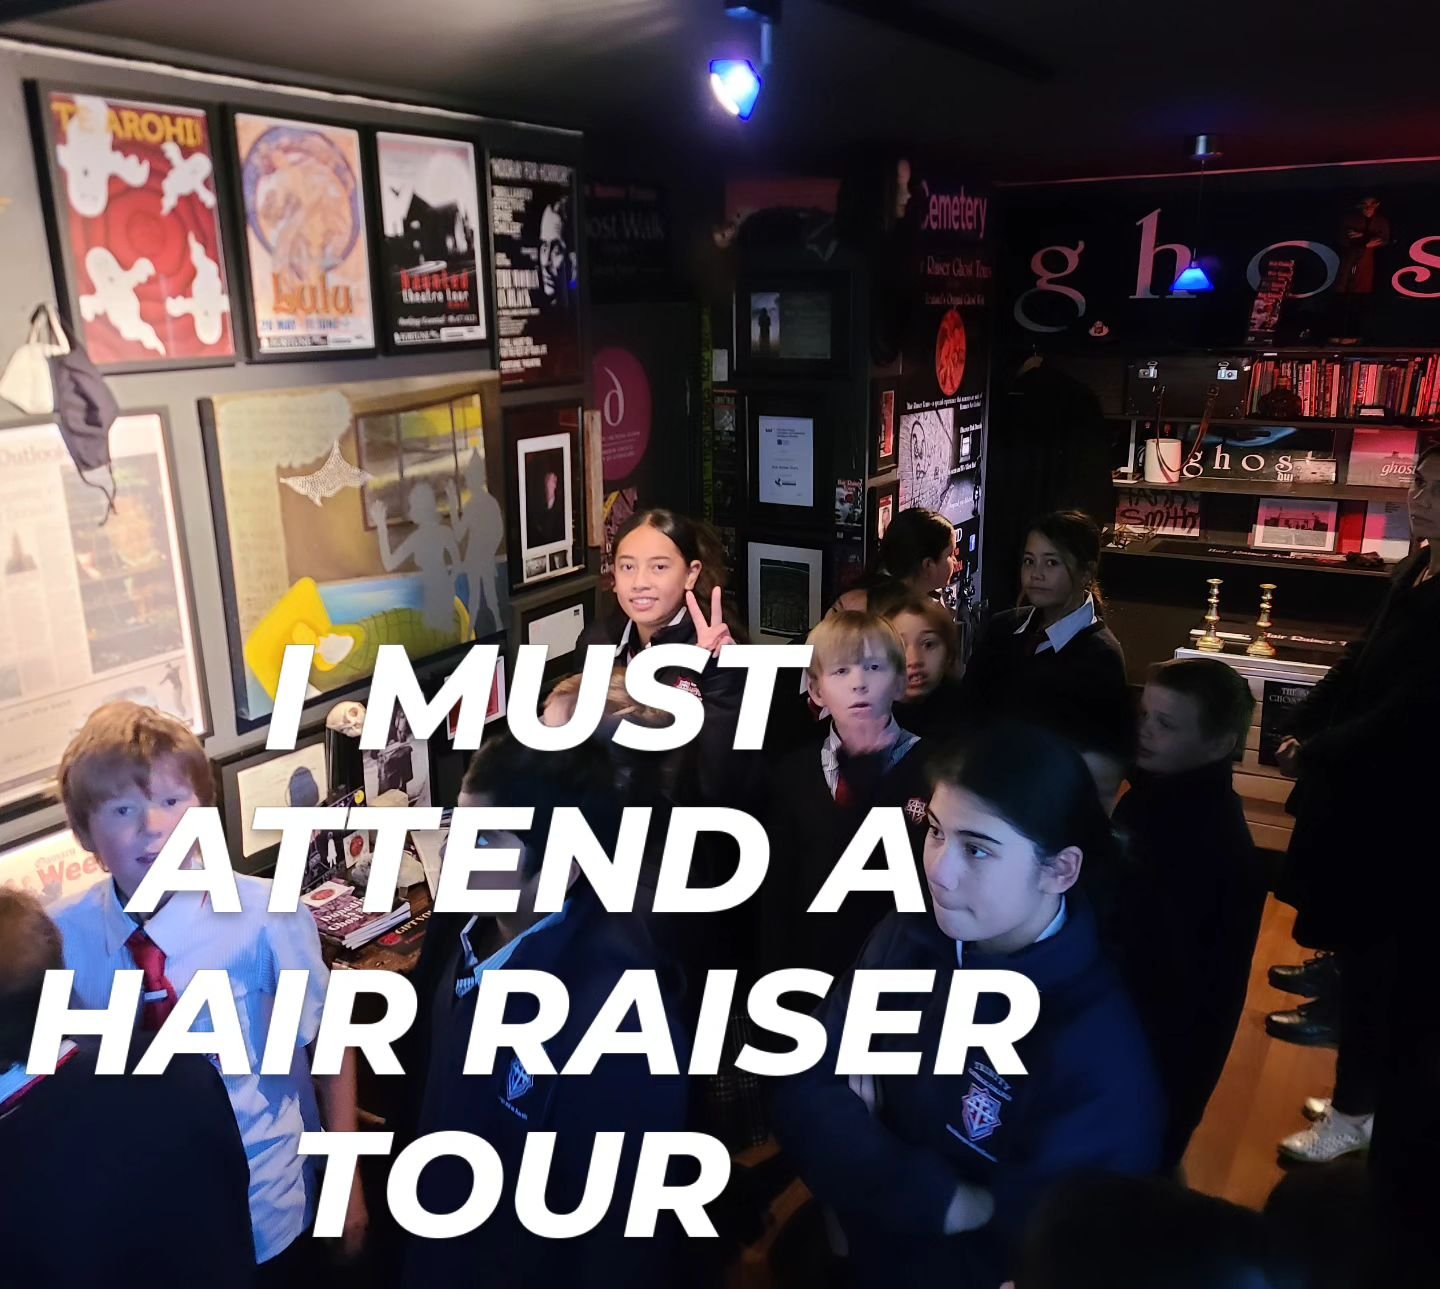 One of the thrills of leading Hair Raiser Tours is our involvement with local schools and their education programs. We have had a fantastic week leading Trinity College students through the snickelways of Dunedin town and sharing some mysterious stor